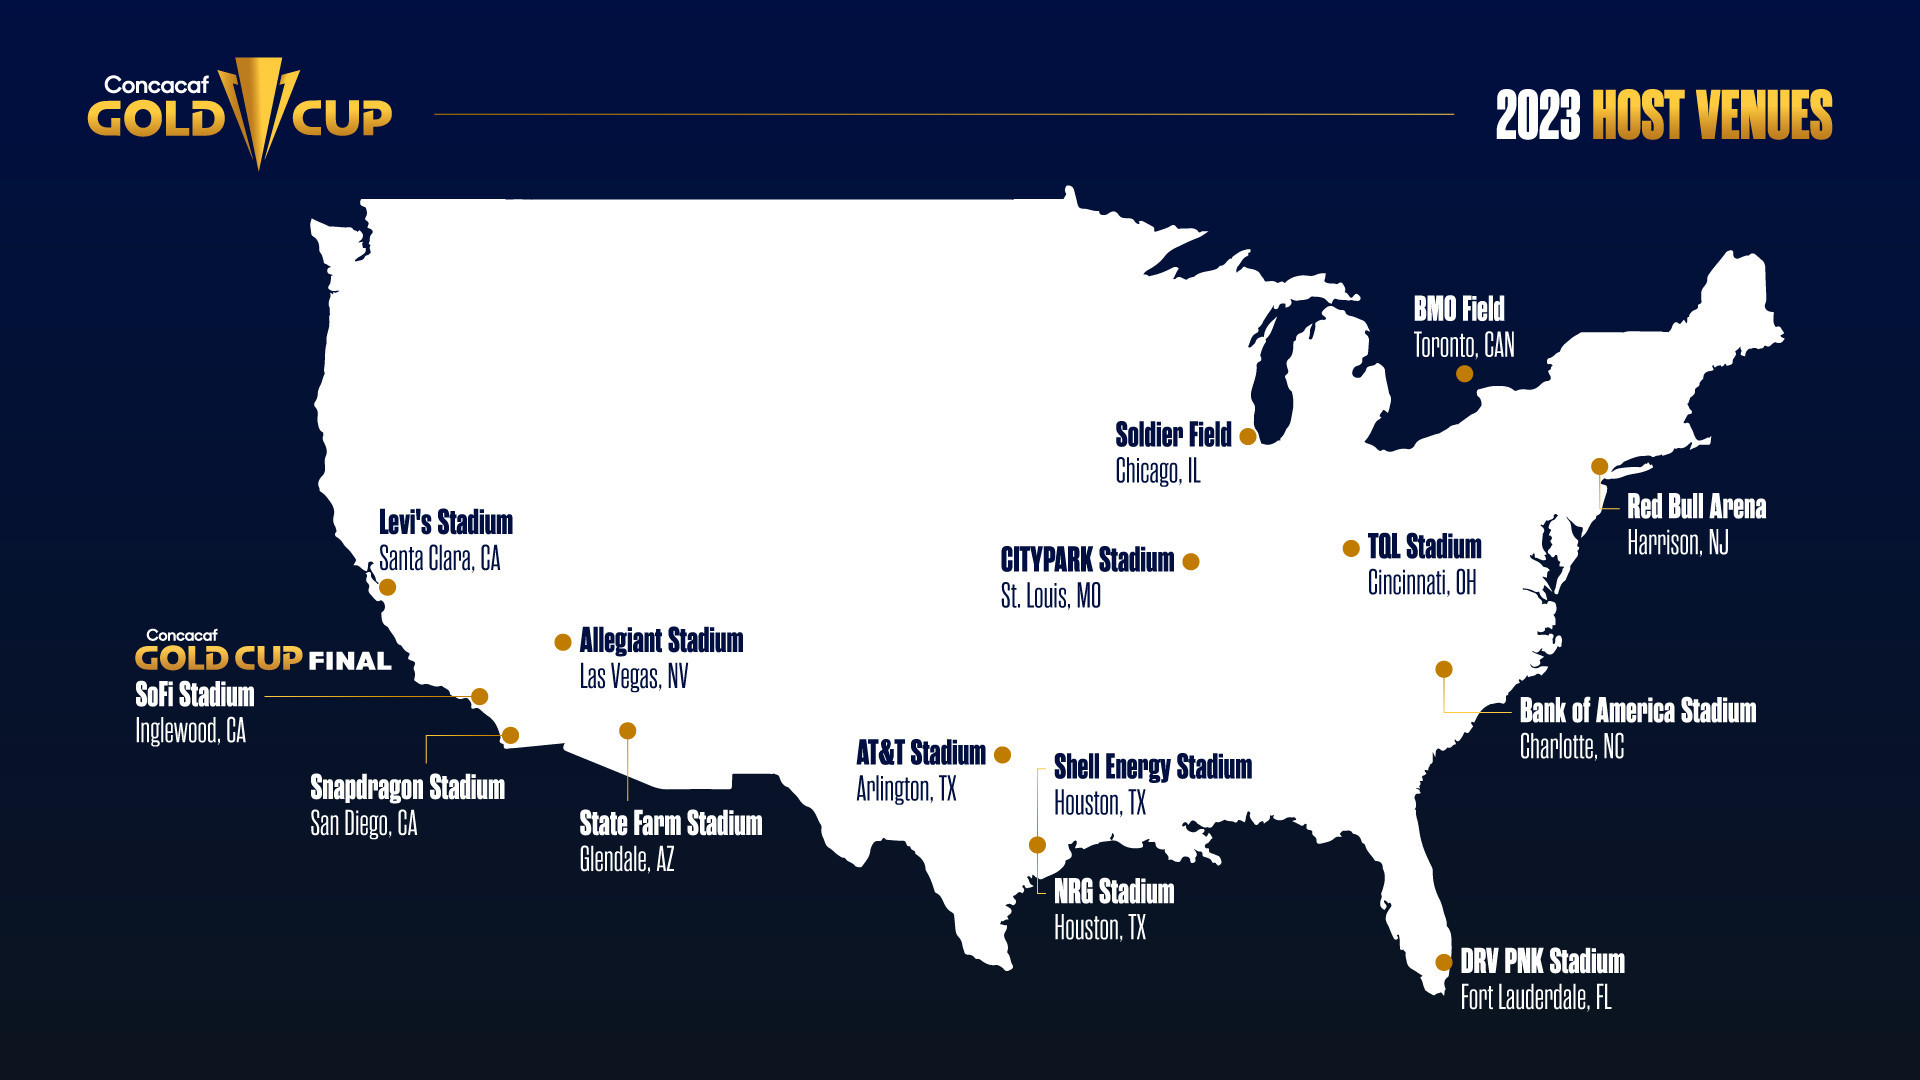 The venues for the 2023 CONCACAF Gold Cup ©CONCACAF